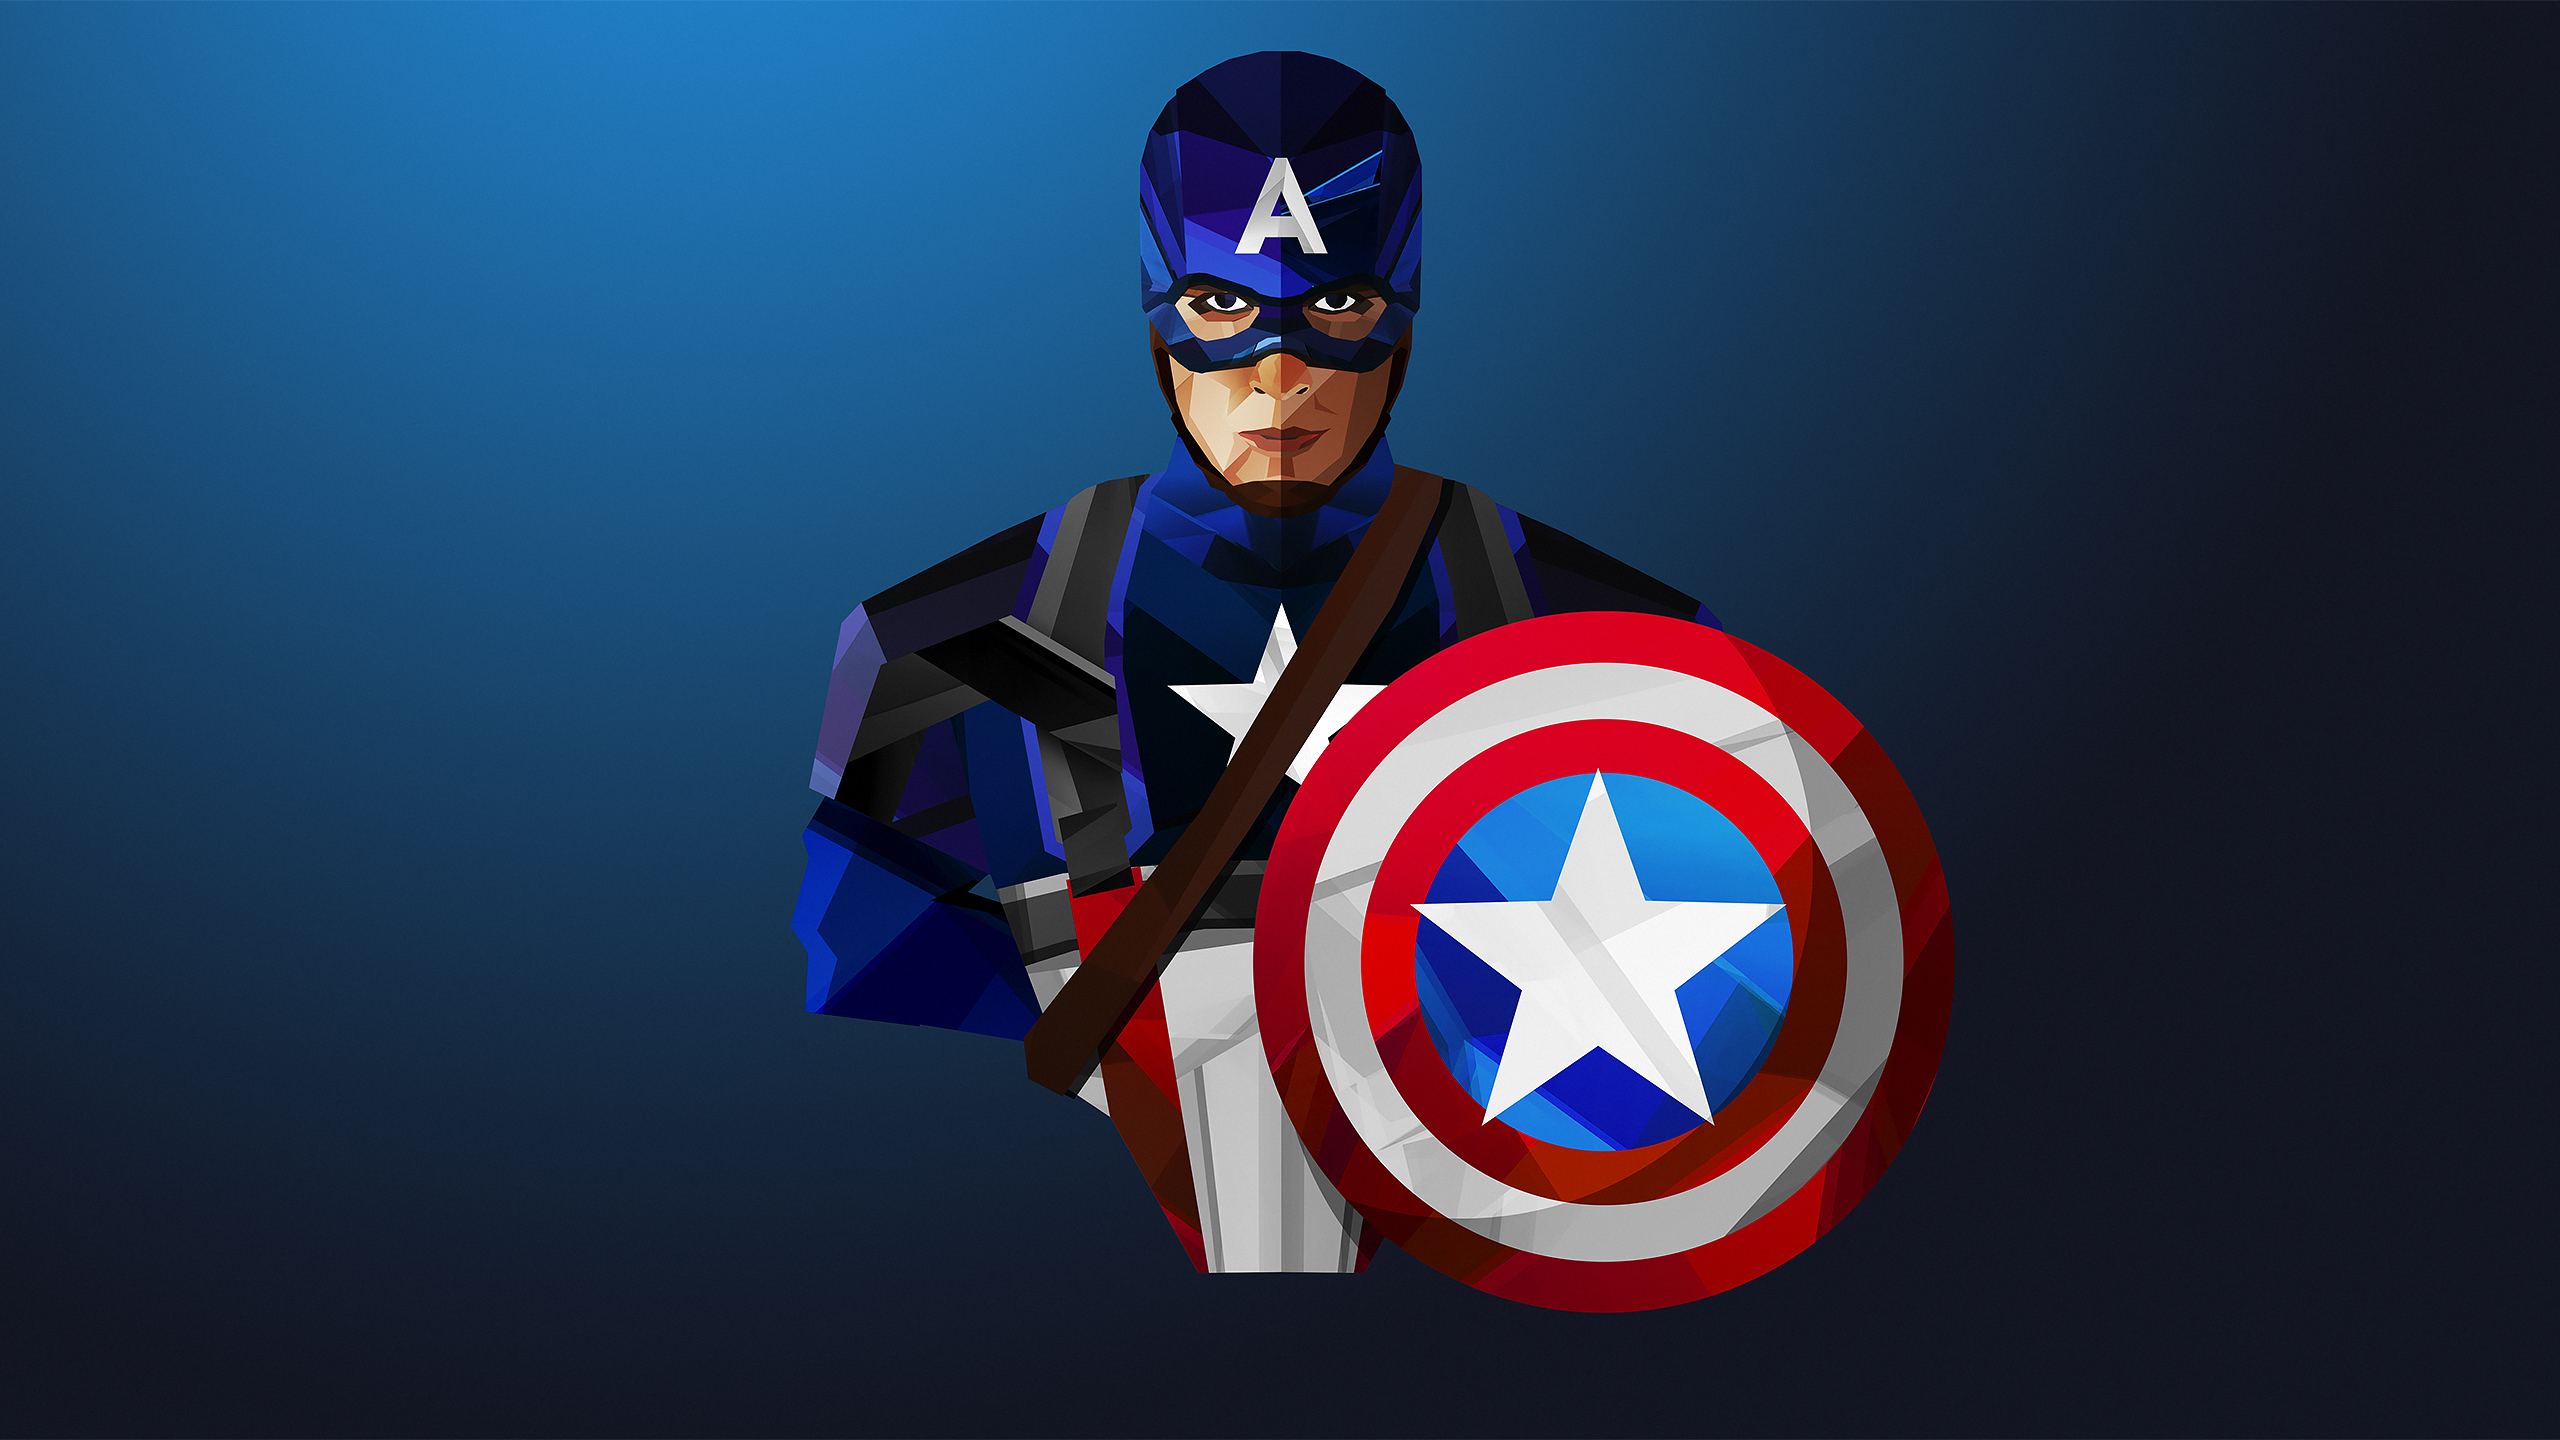 Captain America Low-poly Art Wallpapers